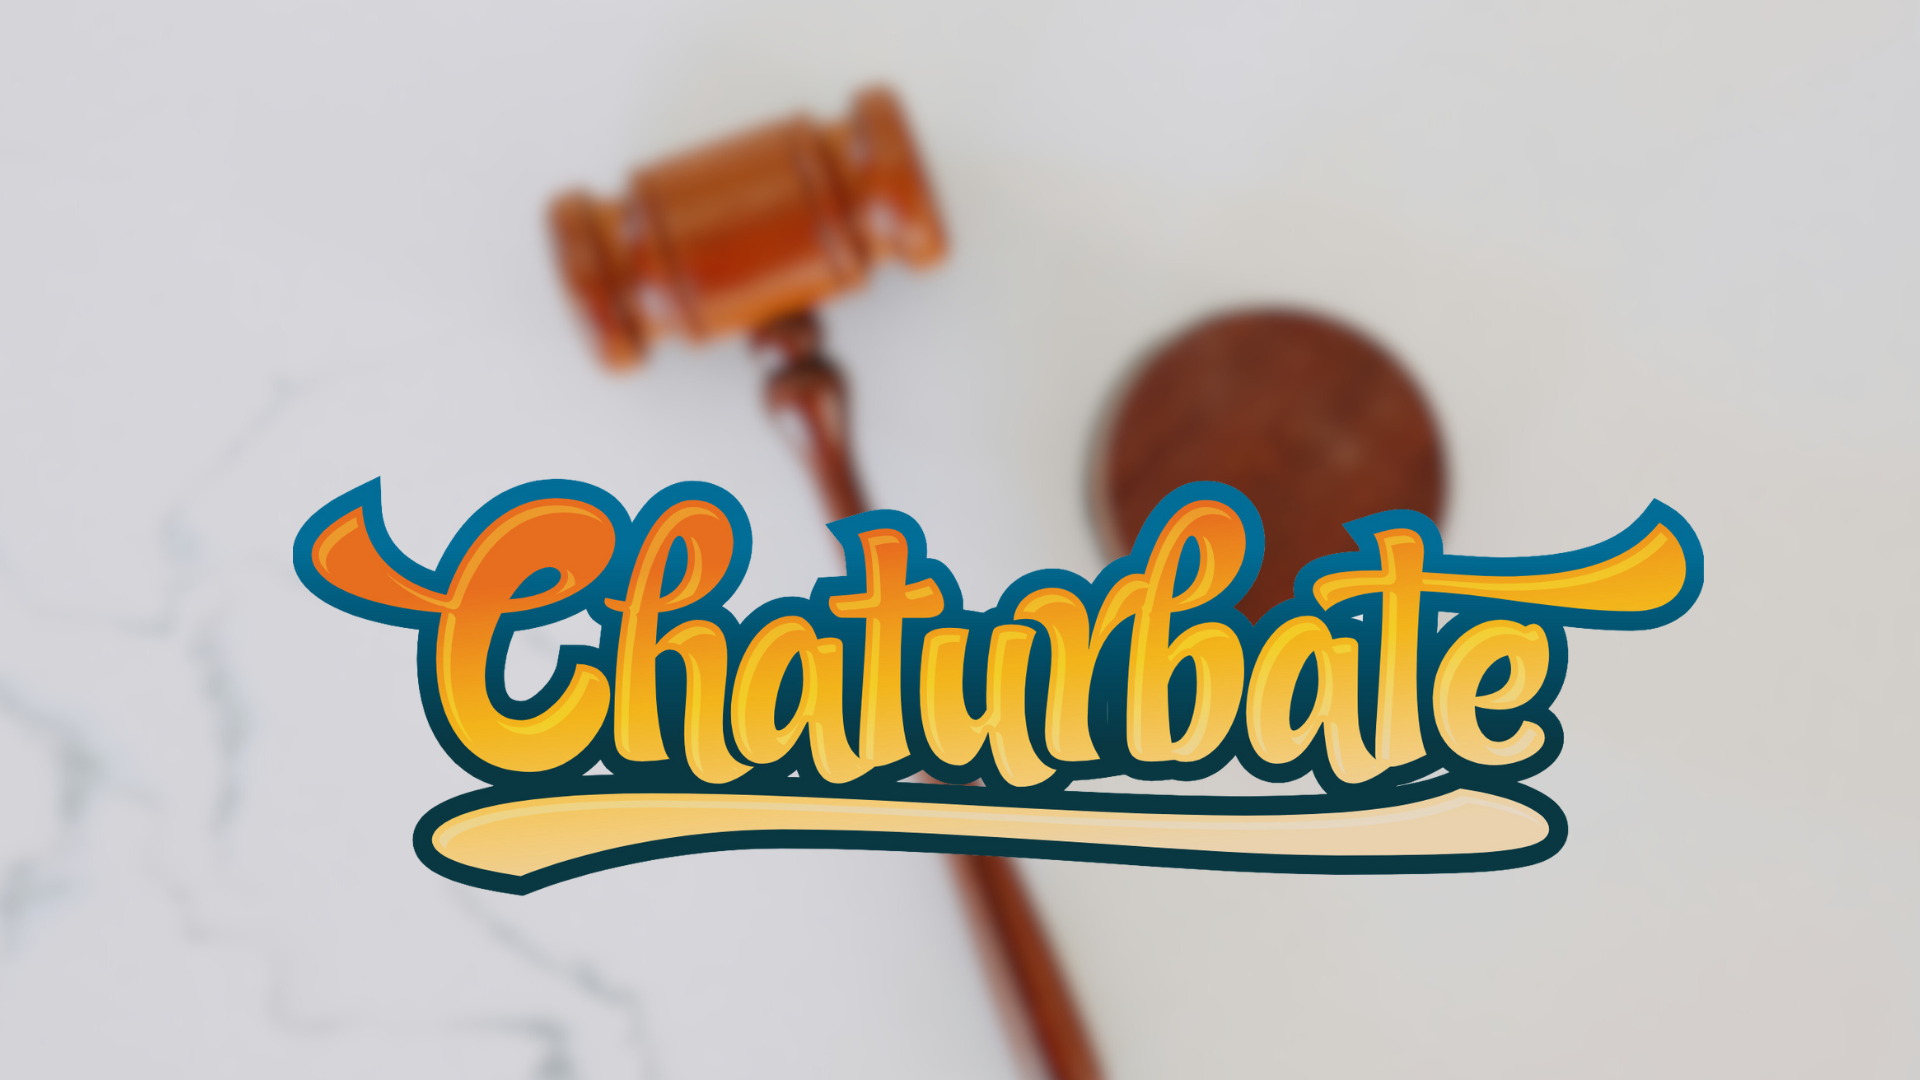 Chaturbate Will Pay Texas $675,000 for Violating New Porn Age Verification Law